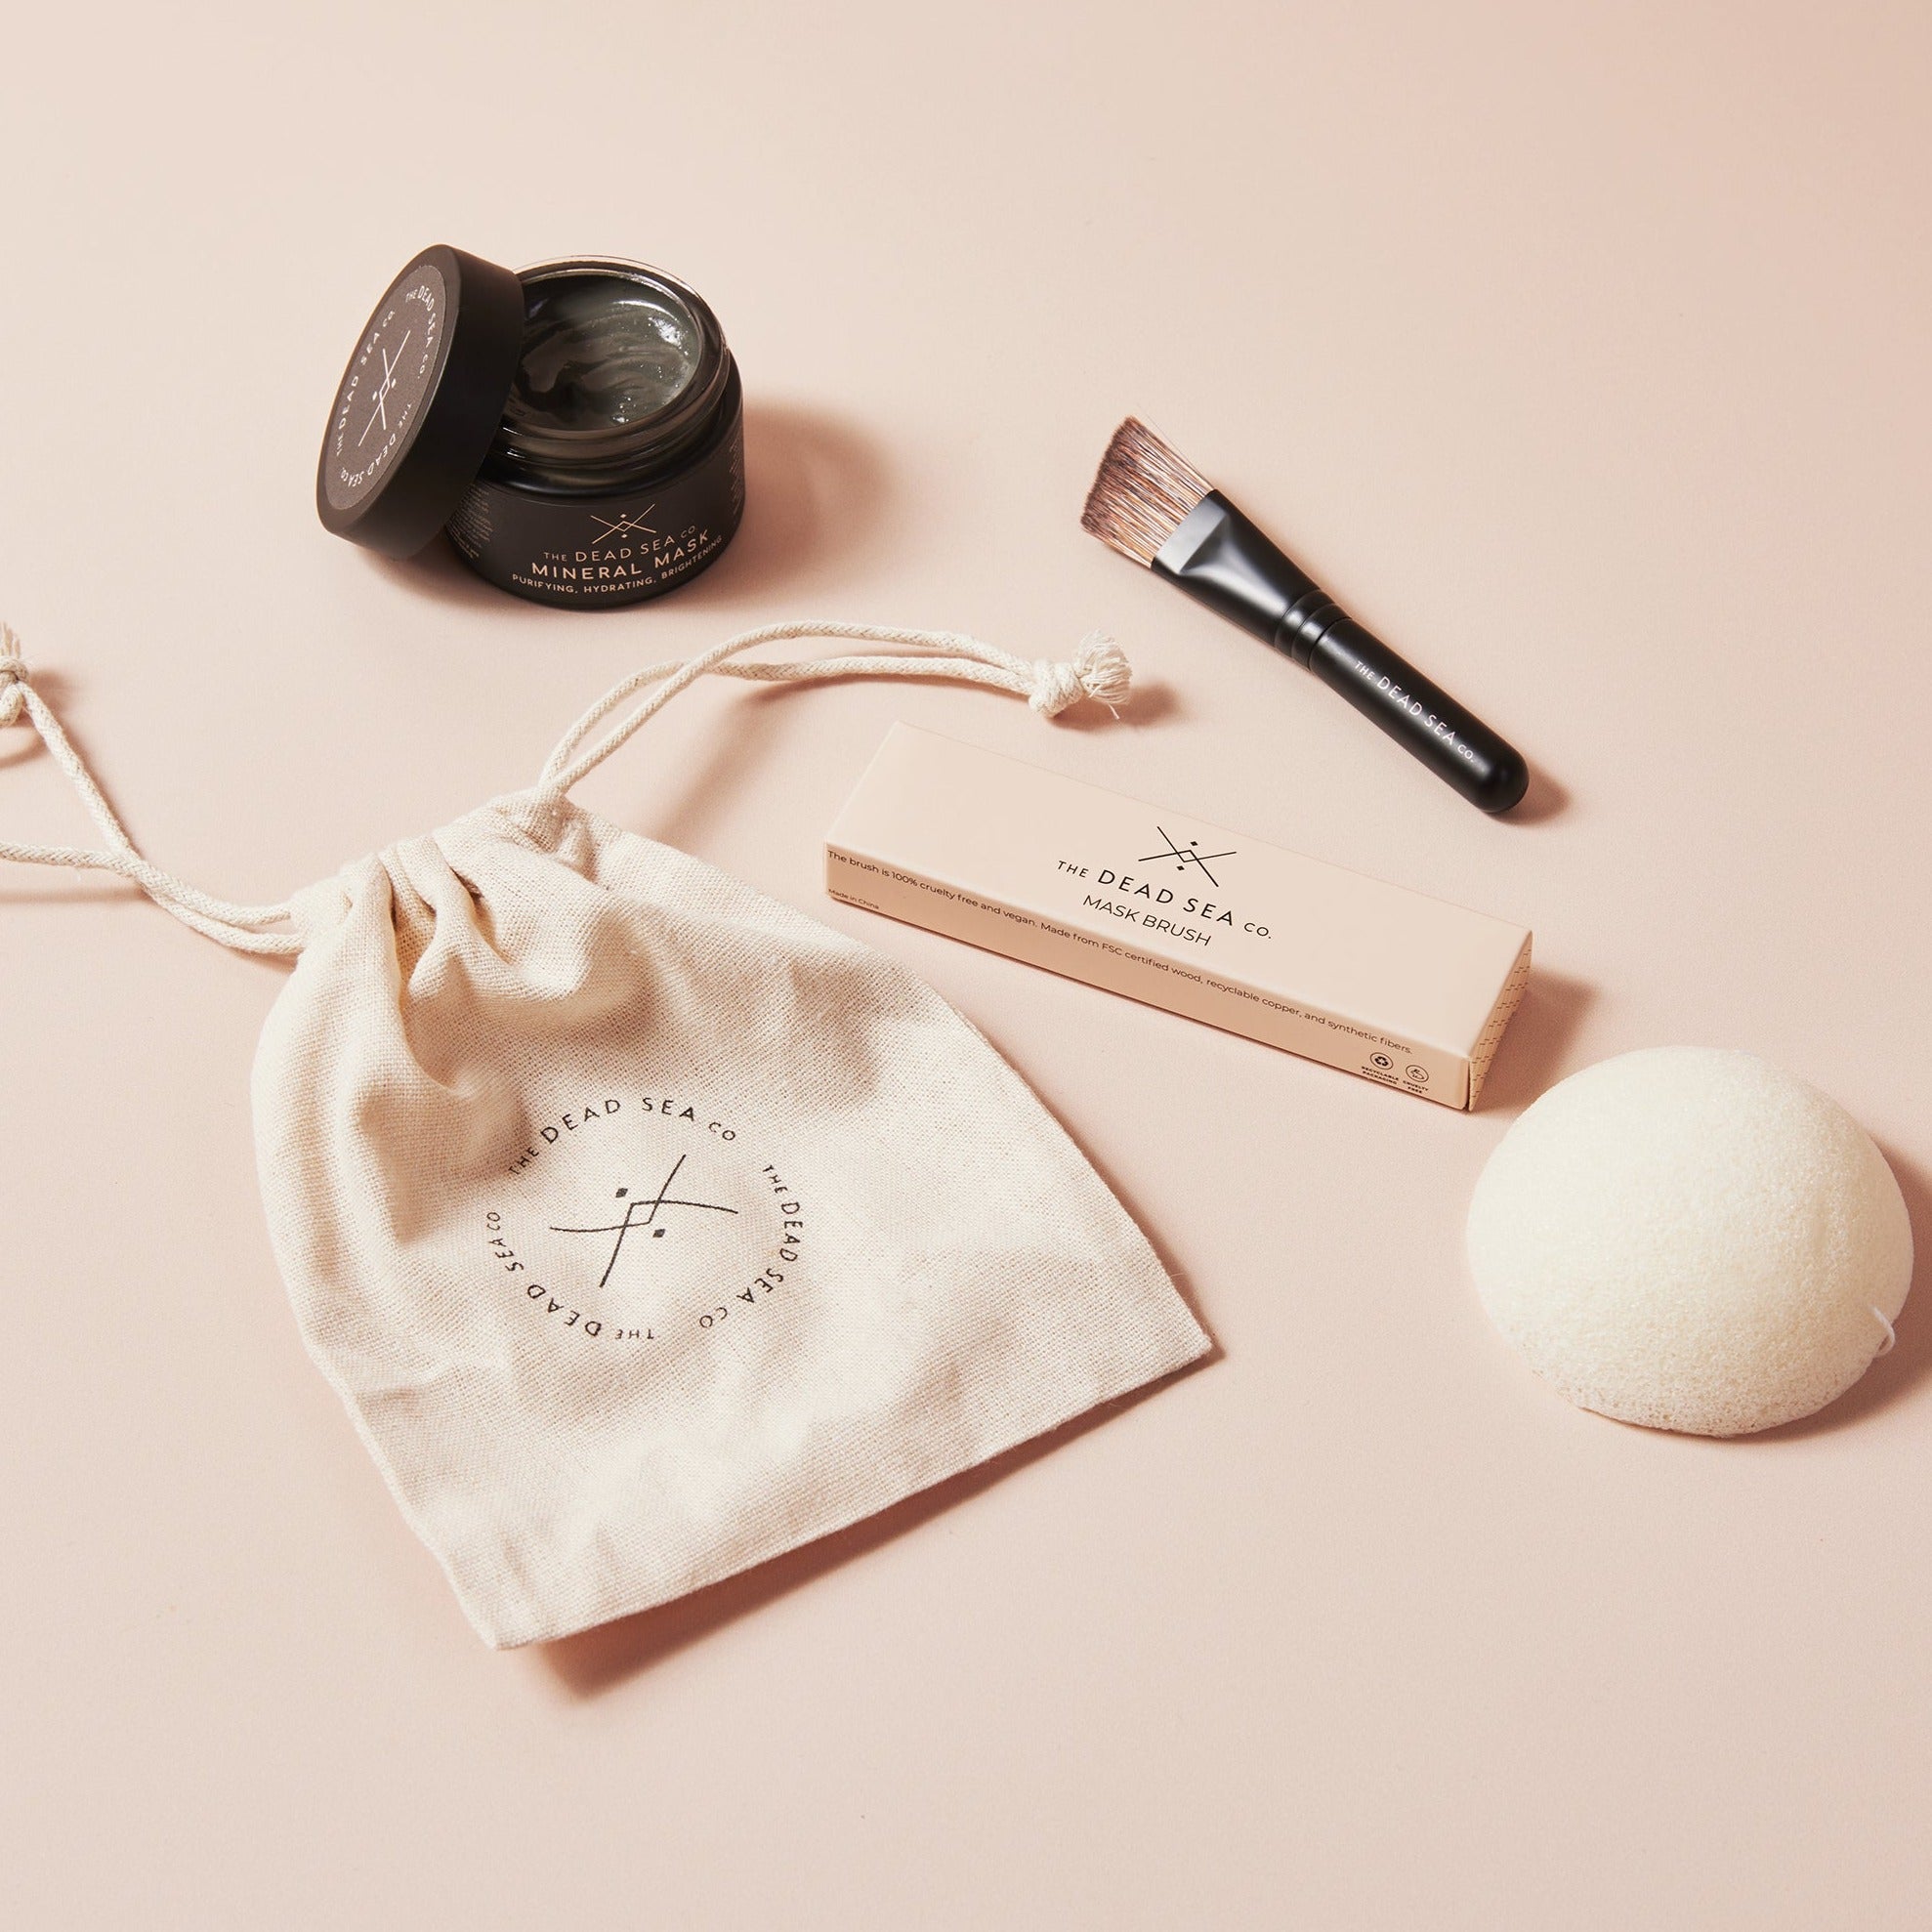 Dead Sea Mineral Mask with open lid showing creamy texture with angled face mask brush, konjac sponge and The Dead Sea Co. branded linen bag